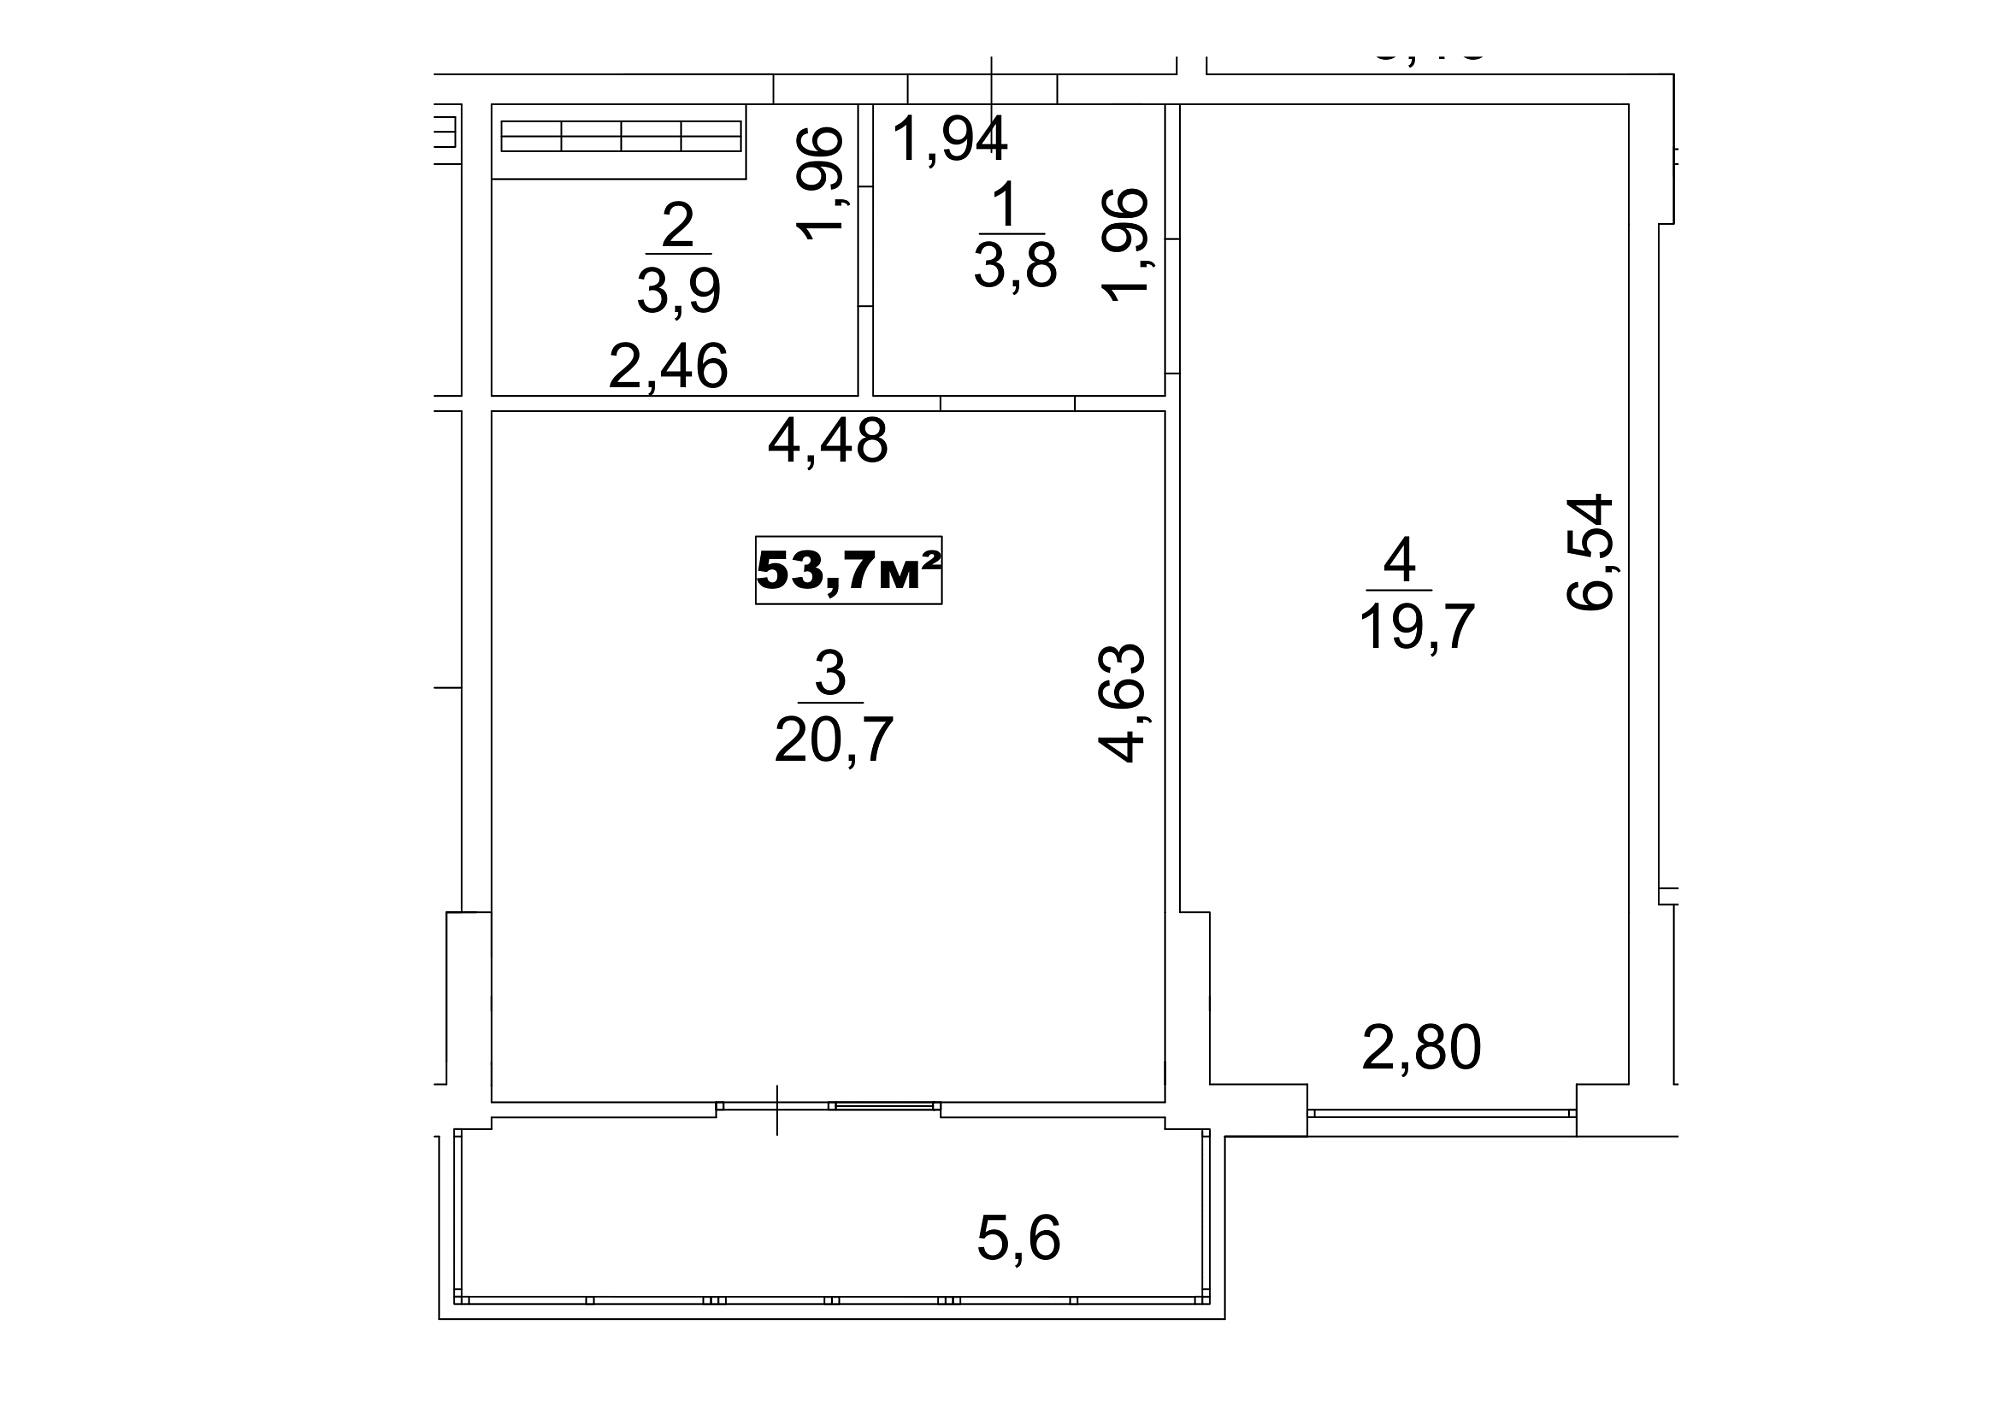 Planning 1-rm flats area 53.7m2, AB-13-08/00068.